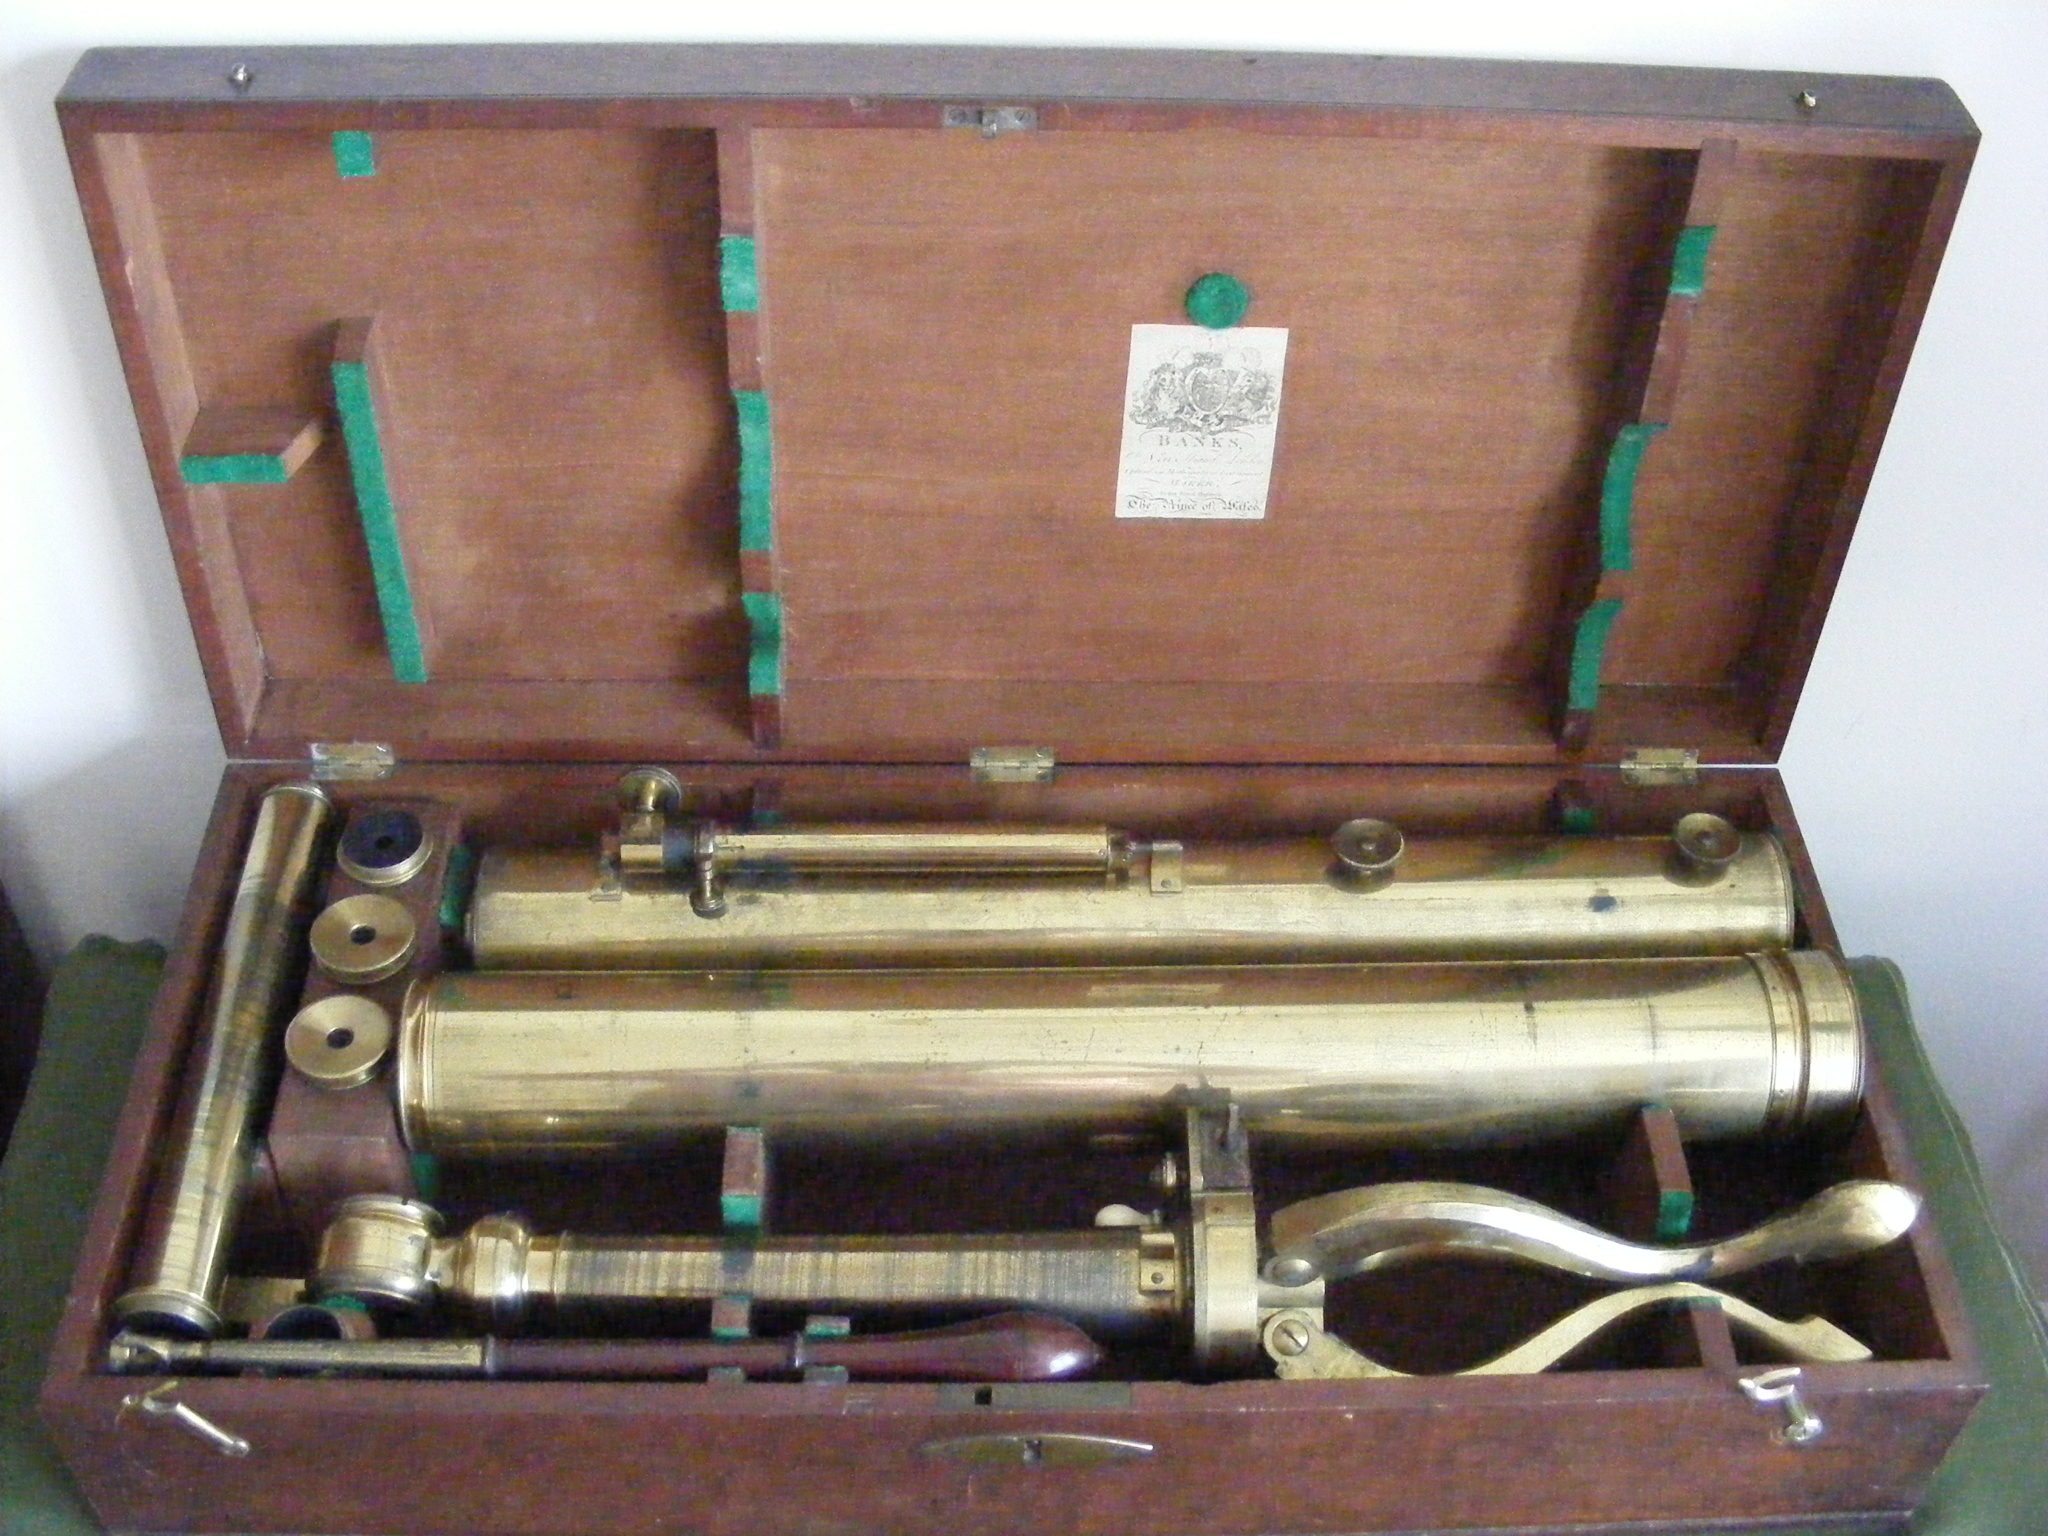 FINE ENGLISH EXPEDITION REFRACTING TELESCOPE BY ROBERT BANKS